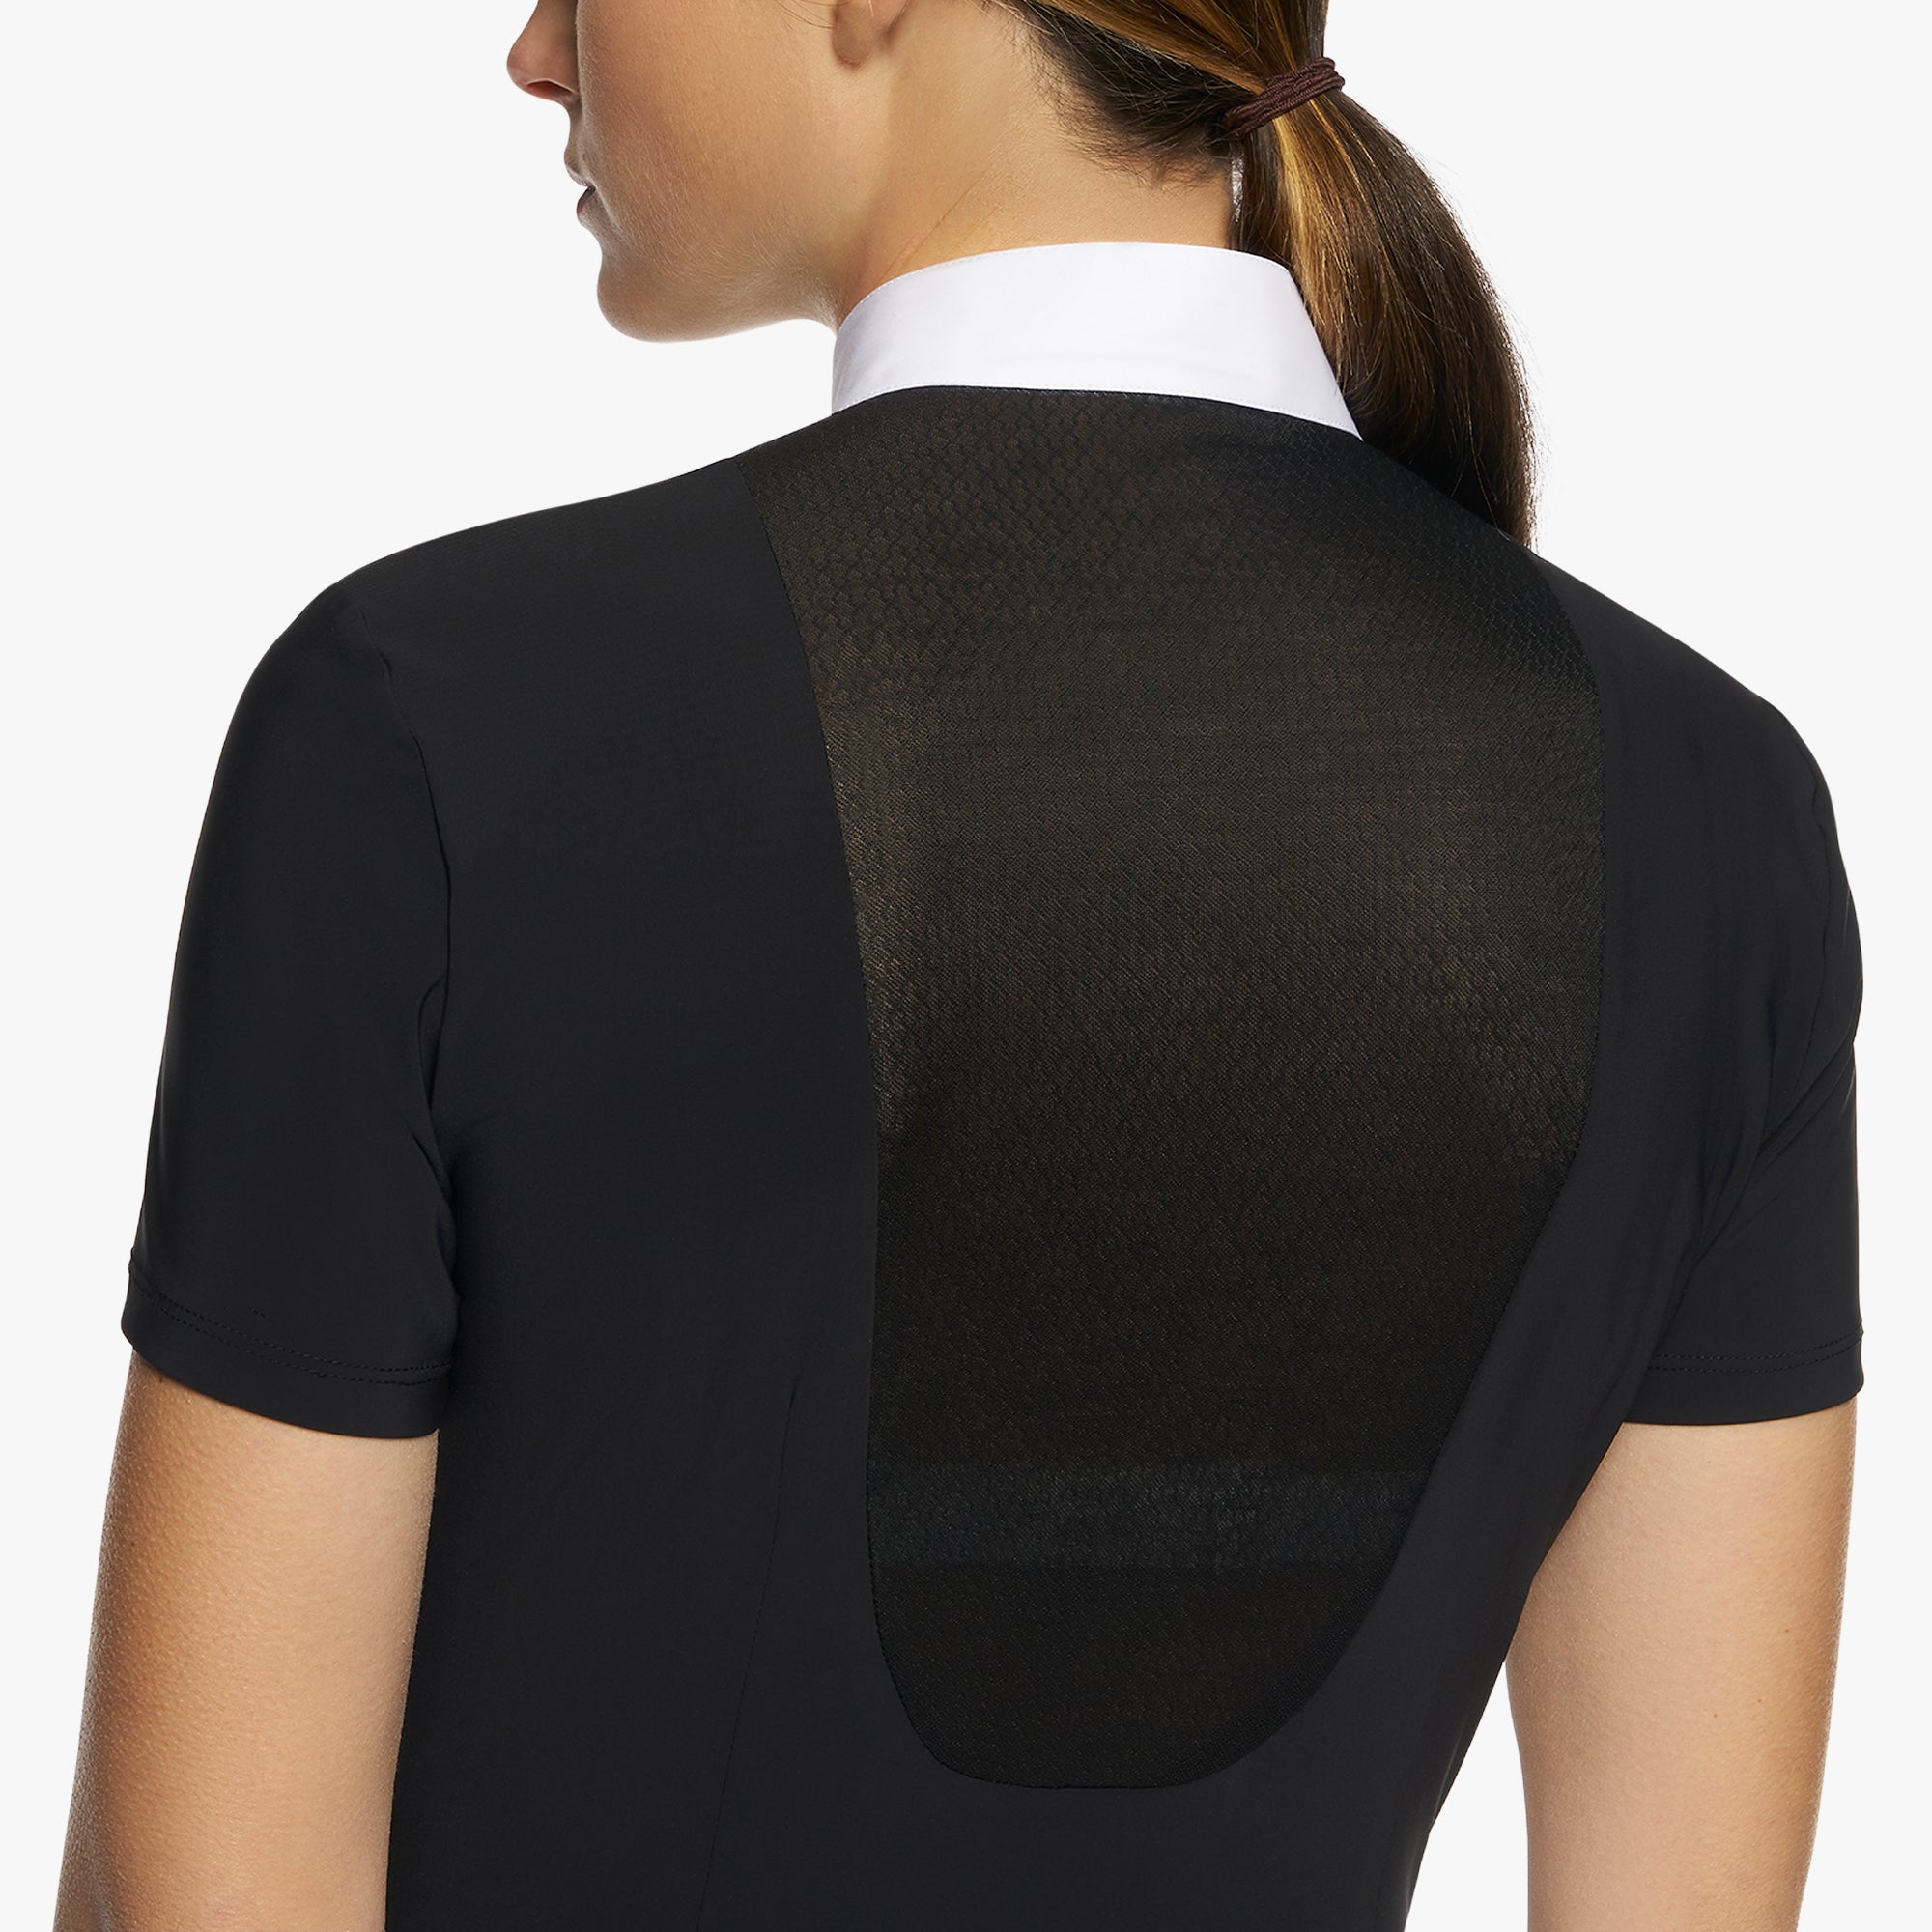 This special shirt is dedicated to horsewomen who want to express their femininity even while competing. It has a slim fit to accent the waistline, and the semi-sheer lace panels set into jersey on the front and back add interest to the silhouette. Perfect worn under a show coat, it features an embroidered CT logo, a contrast poplin collar, and a concealed placket that helps create the clean look of the garment.